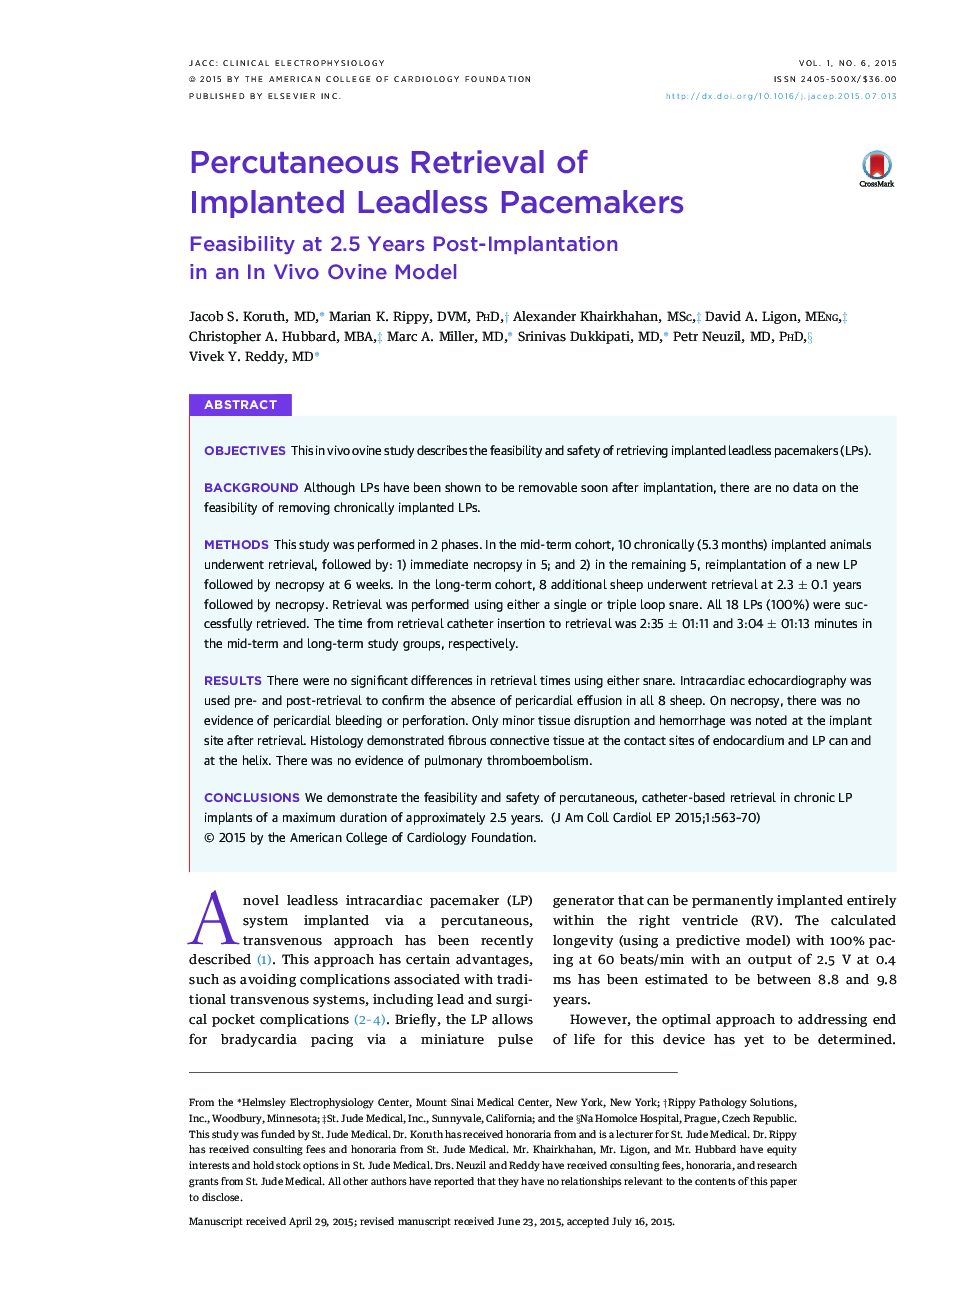 Percutaneous Retrieval of Implanted Leadless Pacemakers : Feasibility at 2.5 Years Post-Implantation in an In Vivo Ovine Model